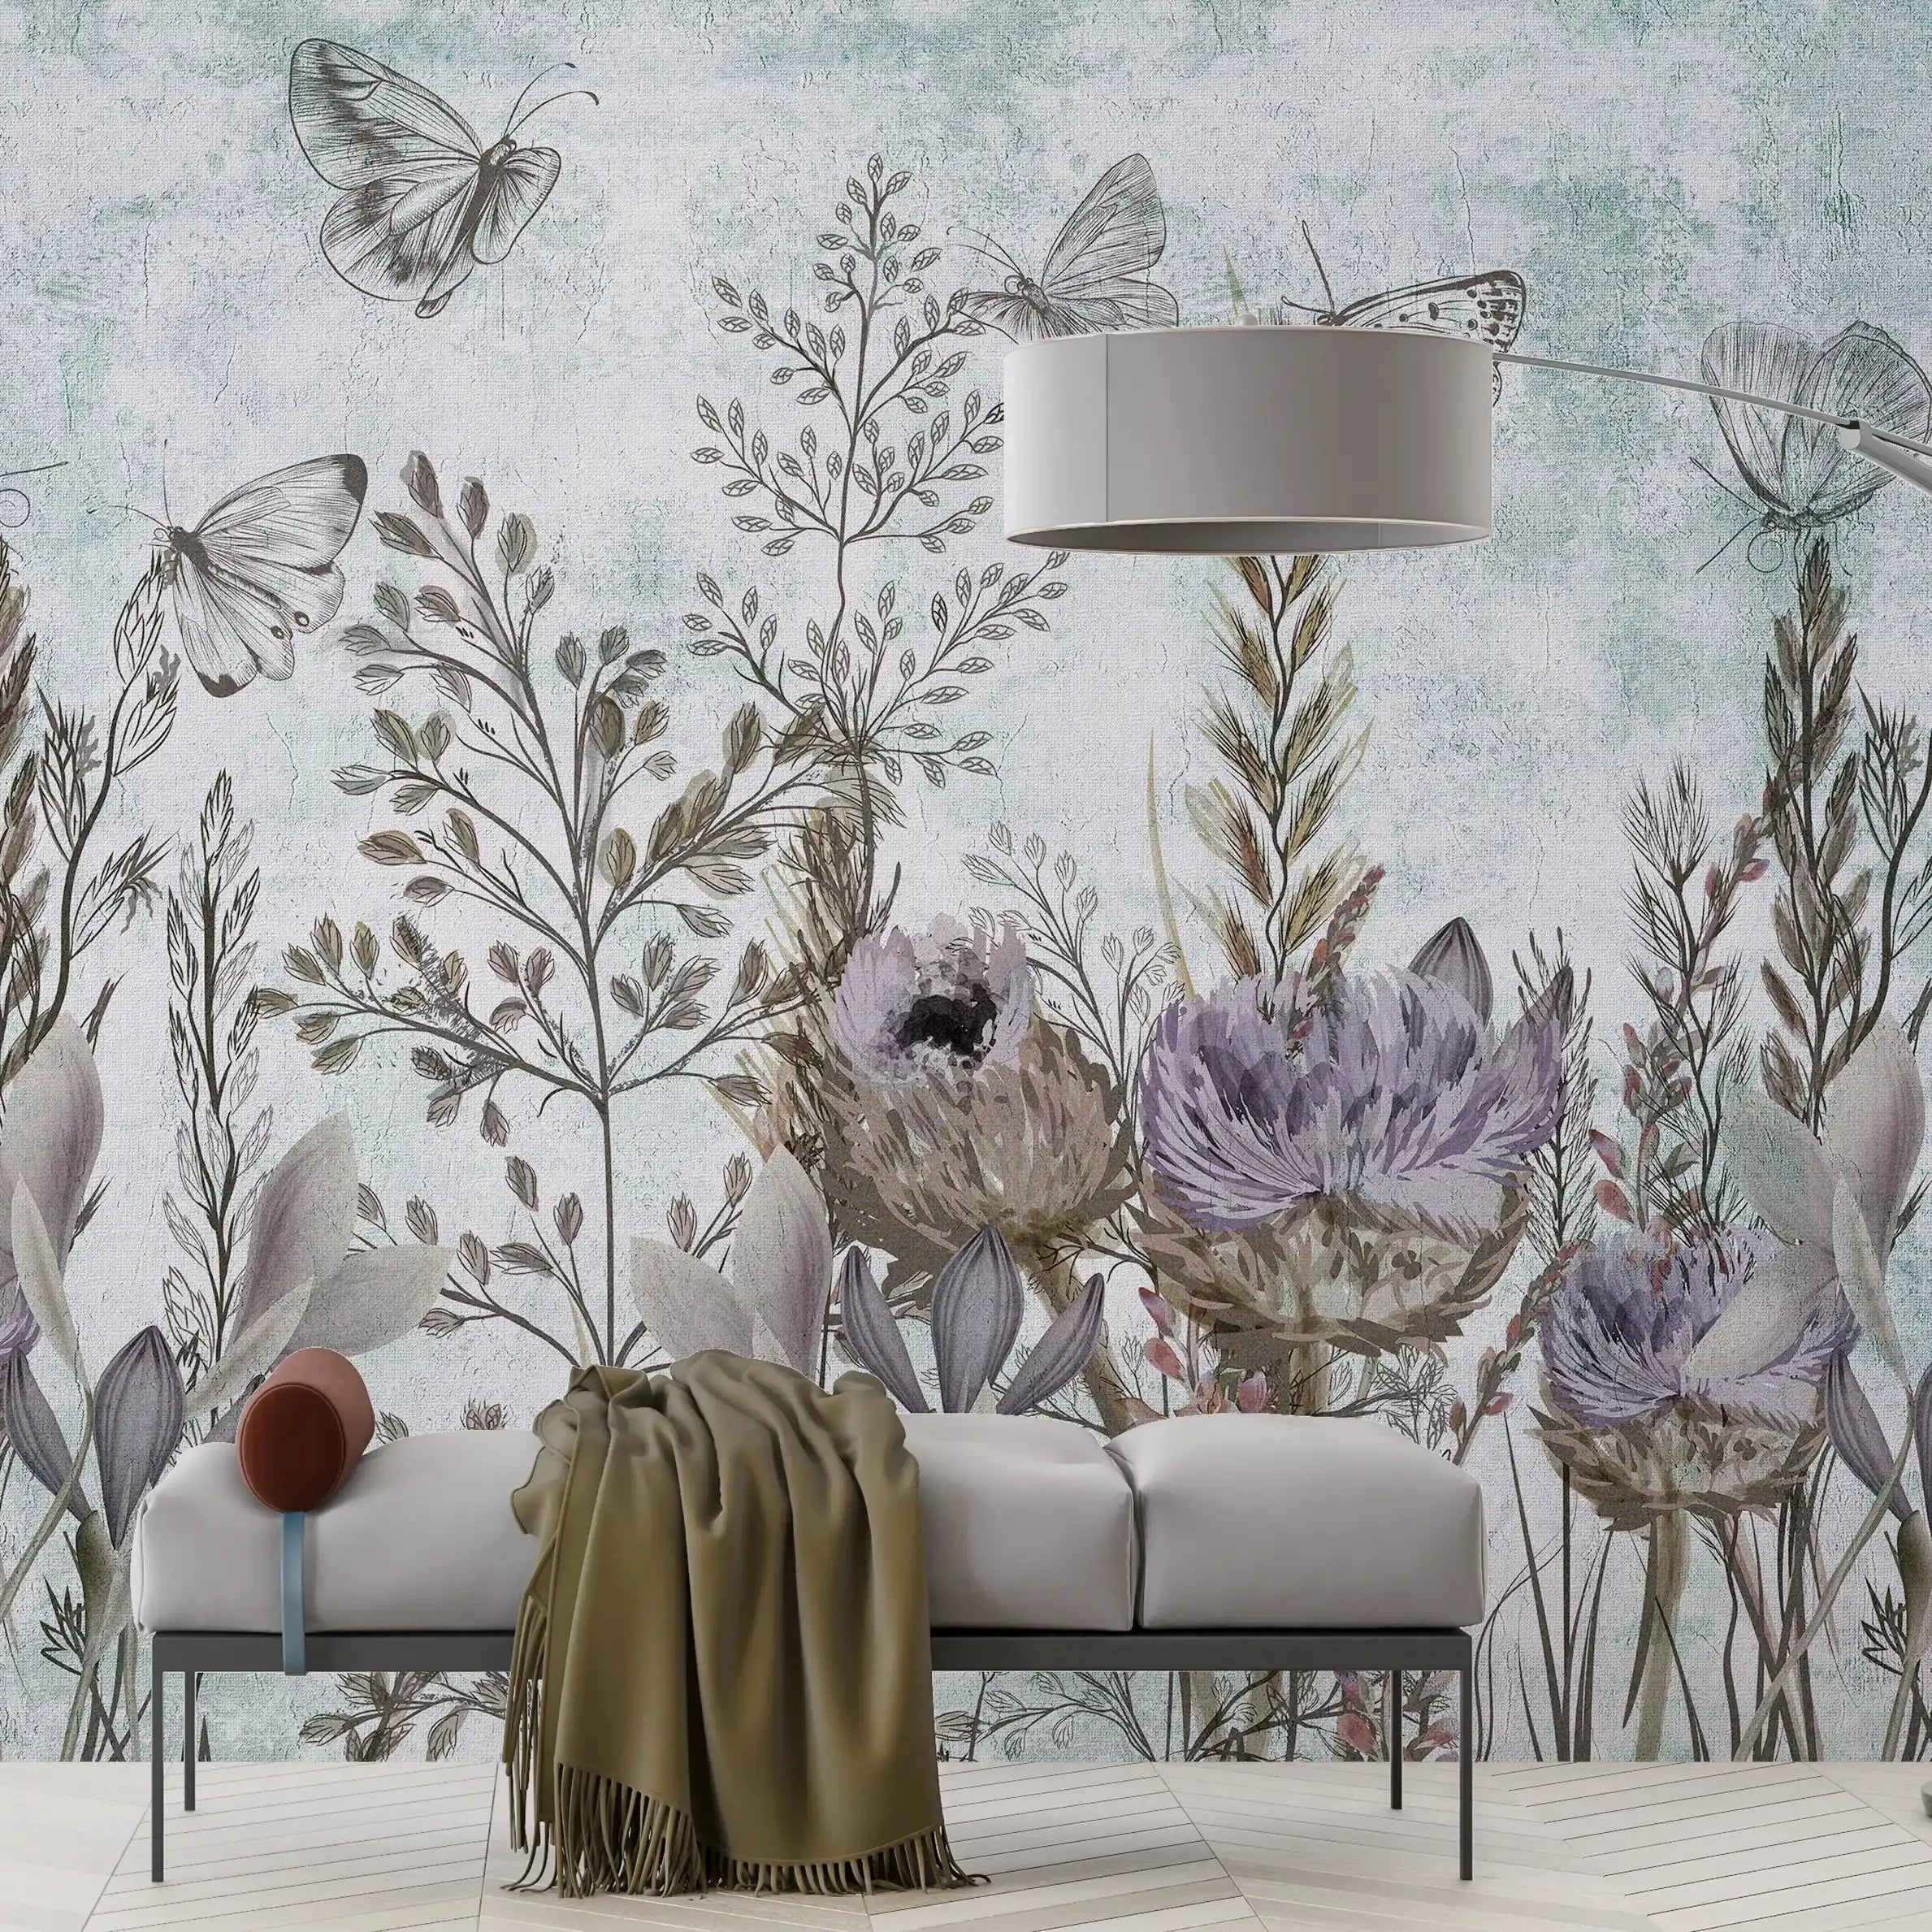 3044-C / Modern Tropical Wallpaper - Peel and Stick, Removable Botanical Design with Muted Whimsy Flowers, Ideal for Bedroom, Bathroom & Kitchen Wall Decor - Artevella